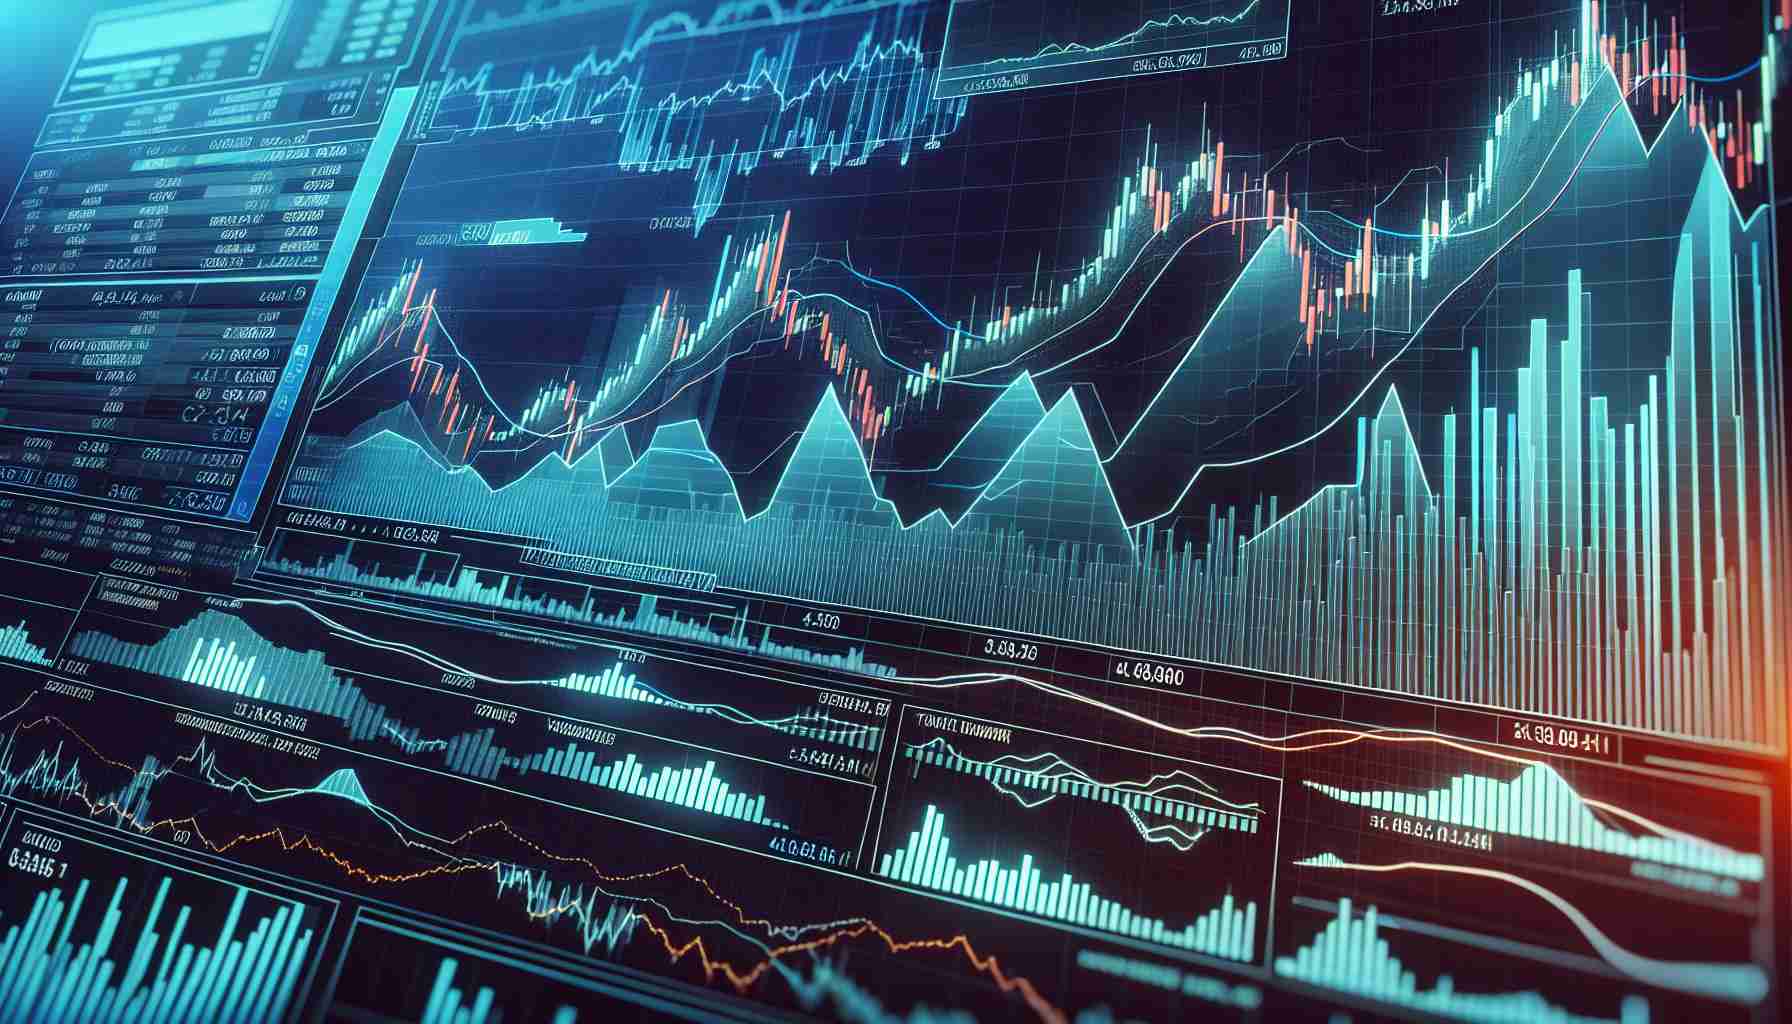 Quantum Blockchain Technologies Sees Uptick in Stock Value Amid Varied Trading Volume